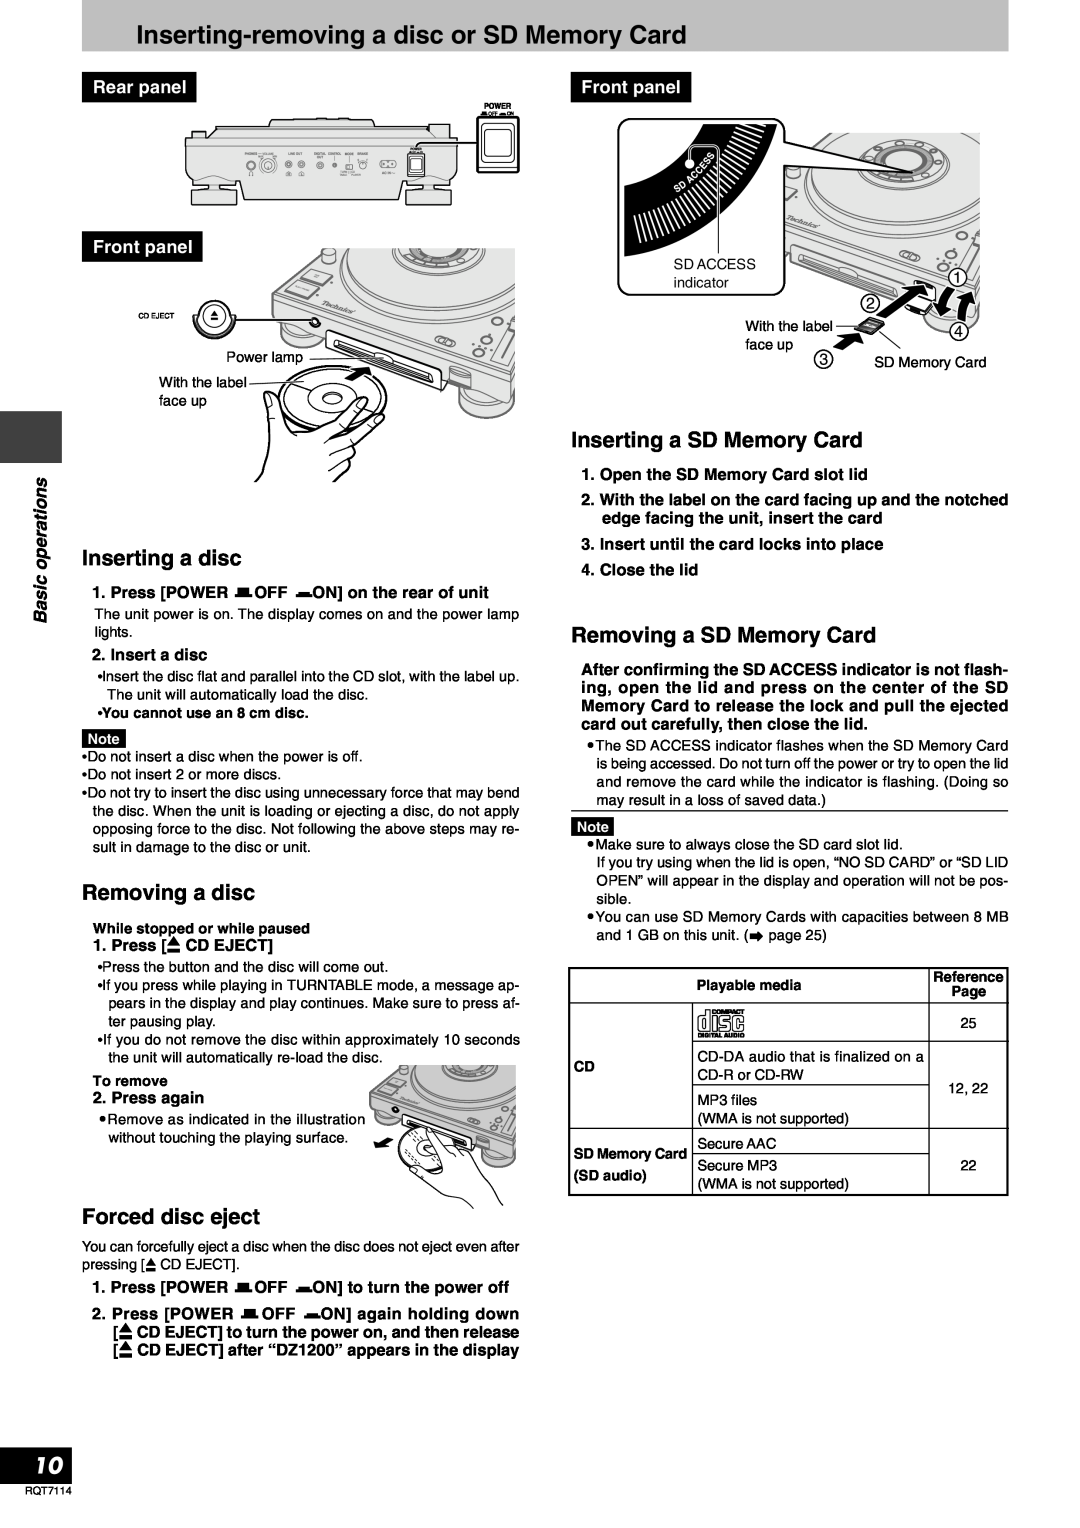 Panasonic RQT7114-2Y Inserting-removinga disc or SD Memory Card, Inserting a disc, Removing a disc, Forced disc eject 